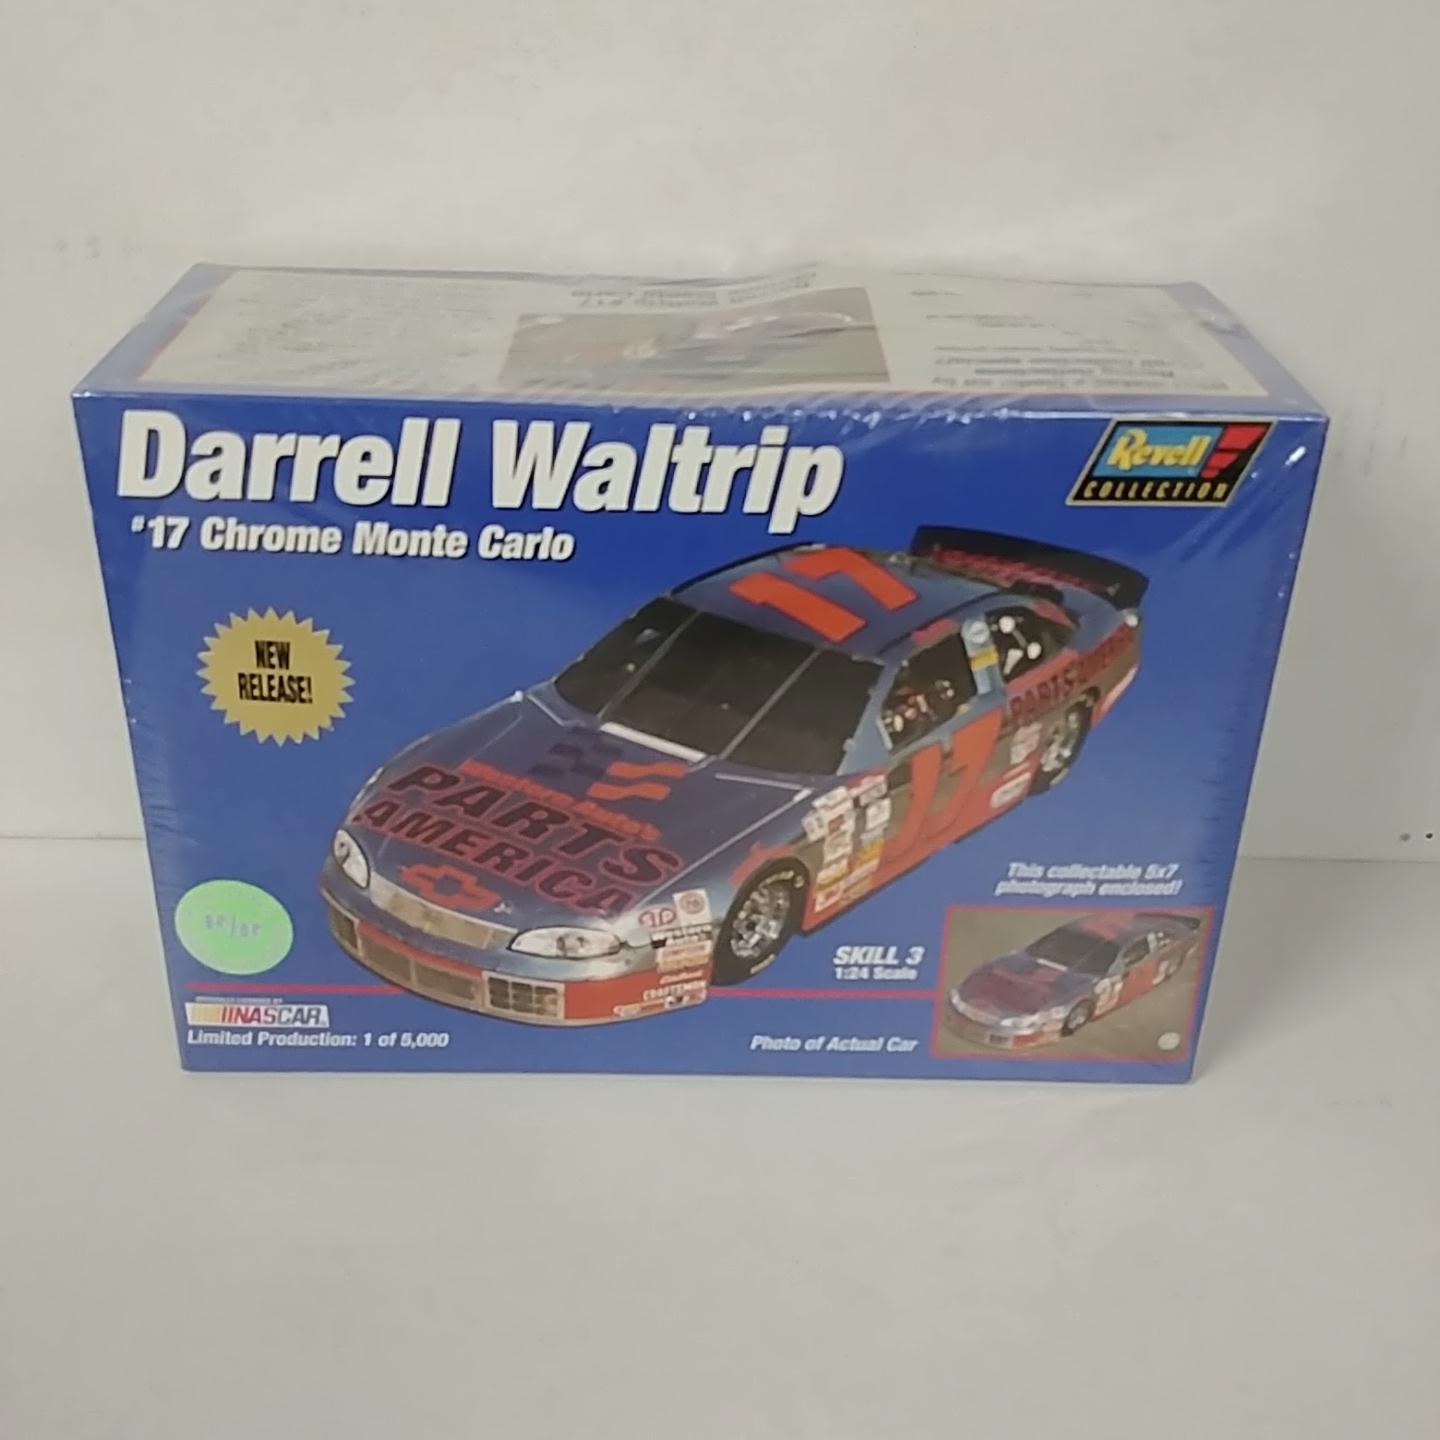 1997 Darrell Waltrip 1/24th Western Auto "Parts America" Monte Carlo model kit by Revell